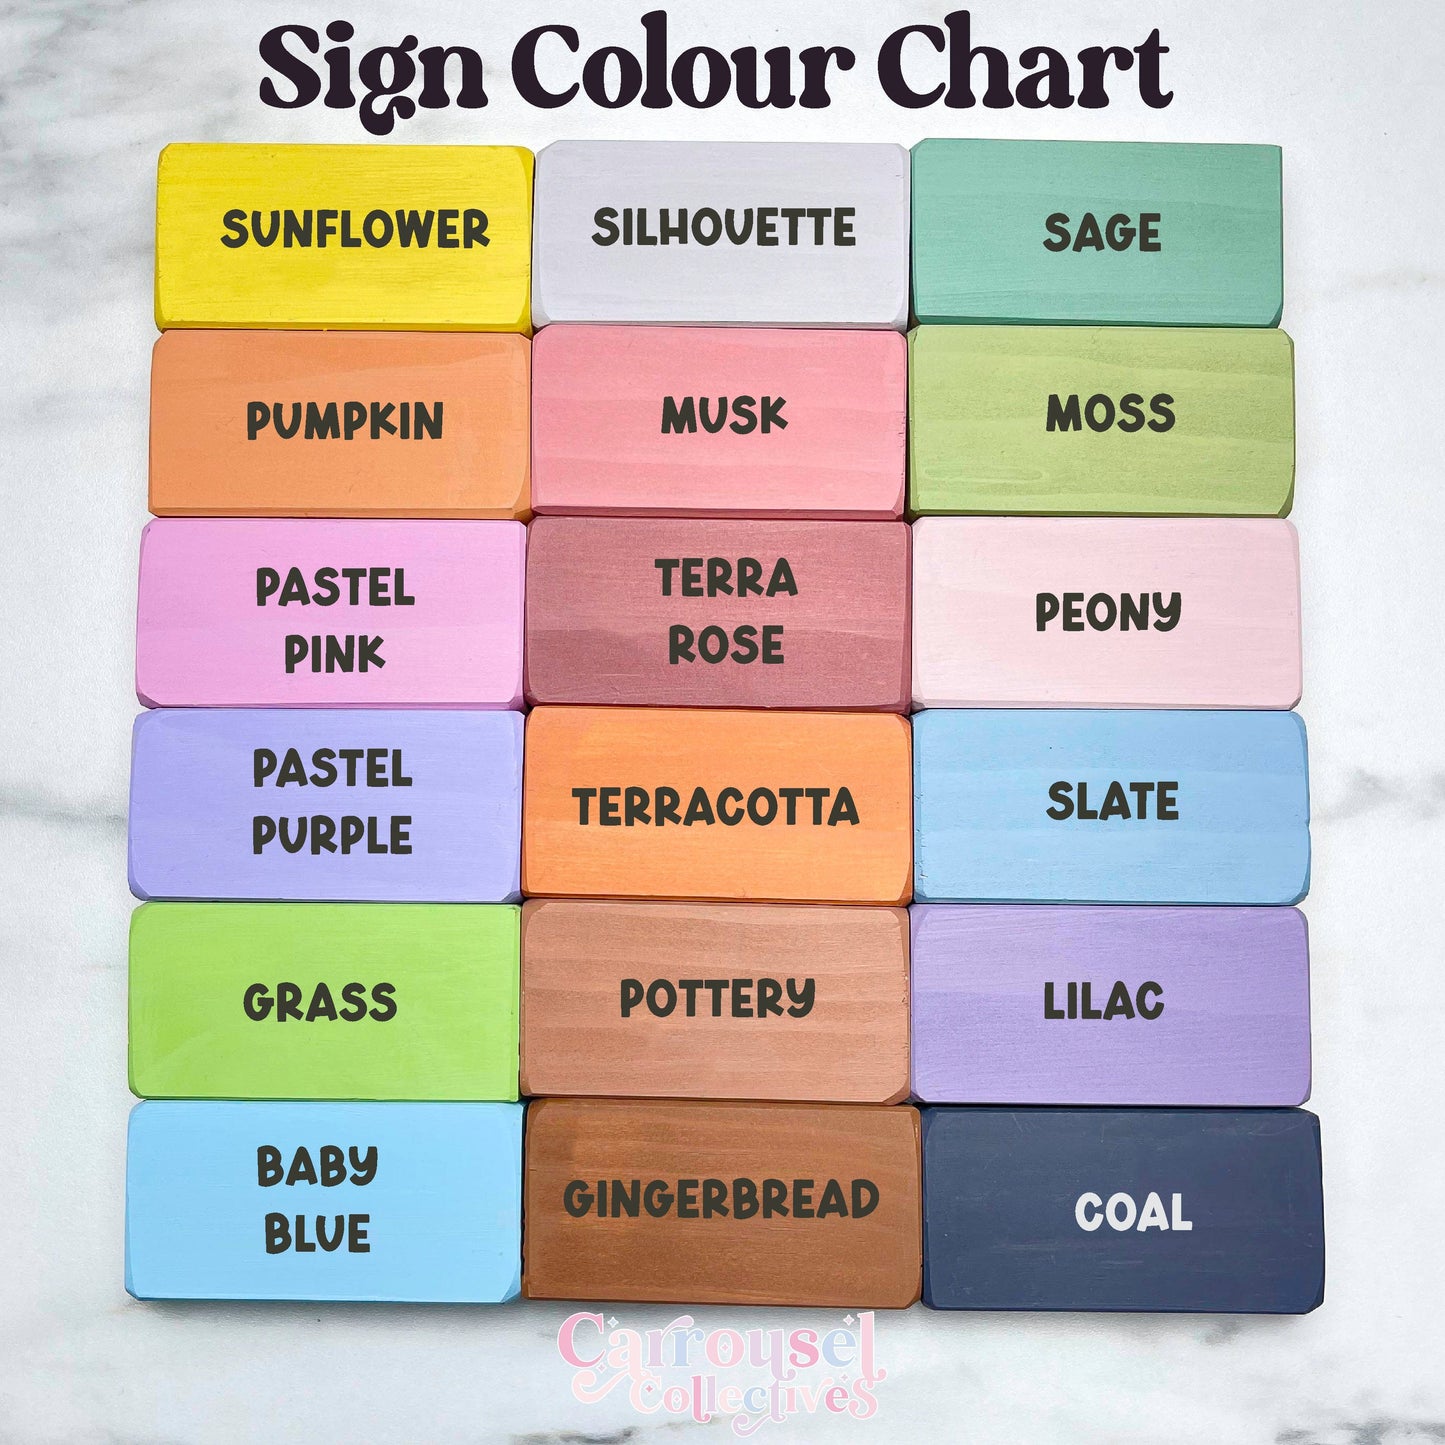 Personalised baby birth chart acrylic sign, inspiring quote signs, kids quote sign